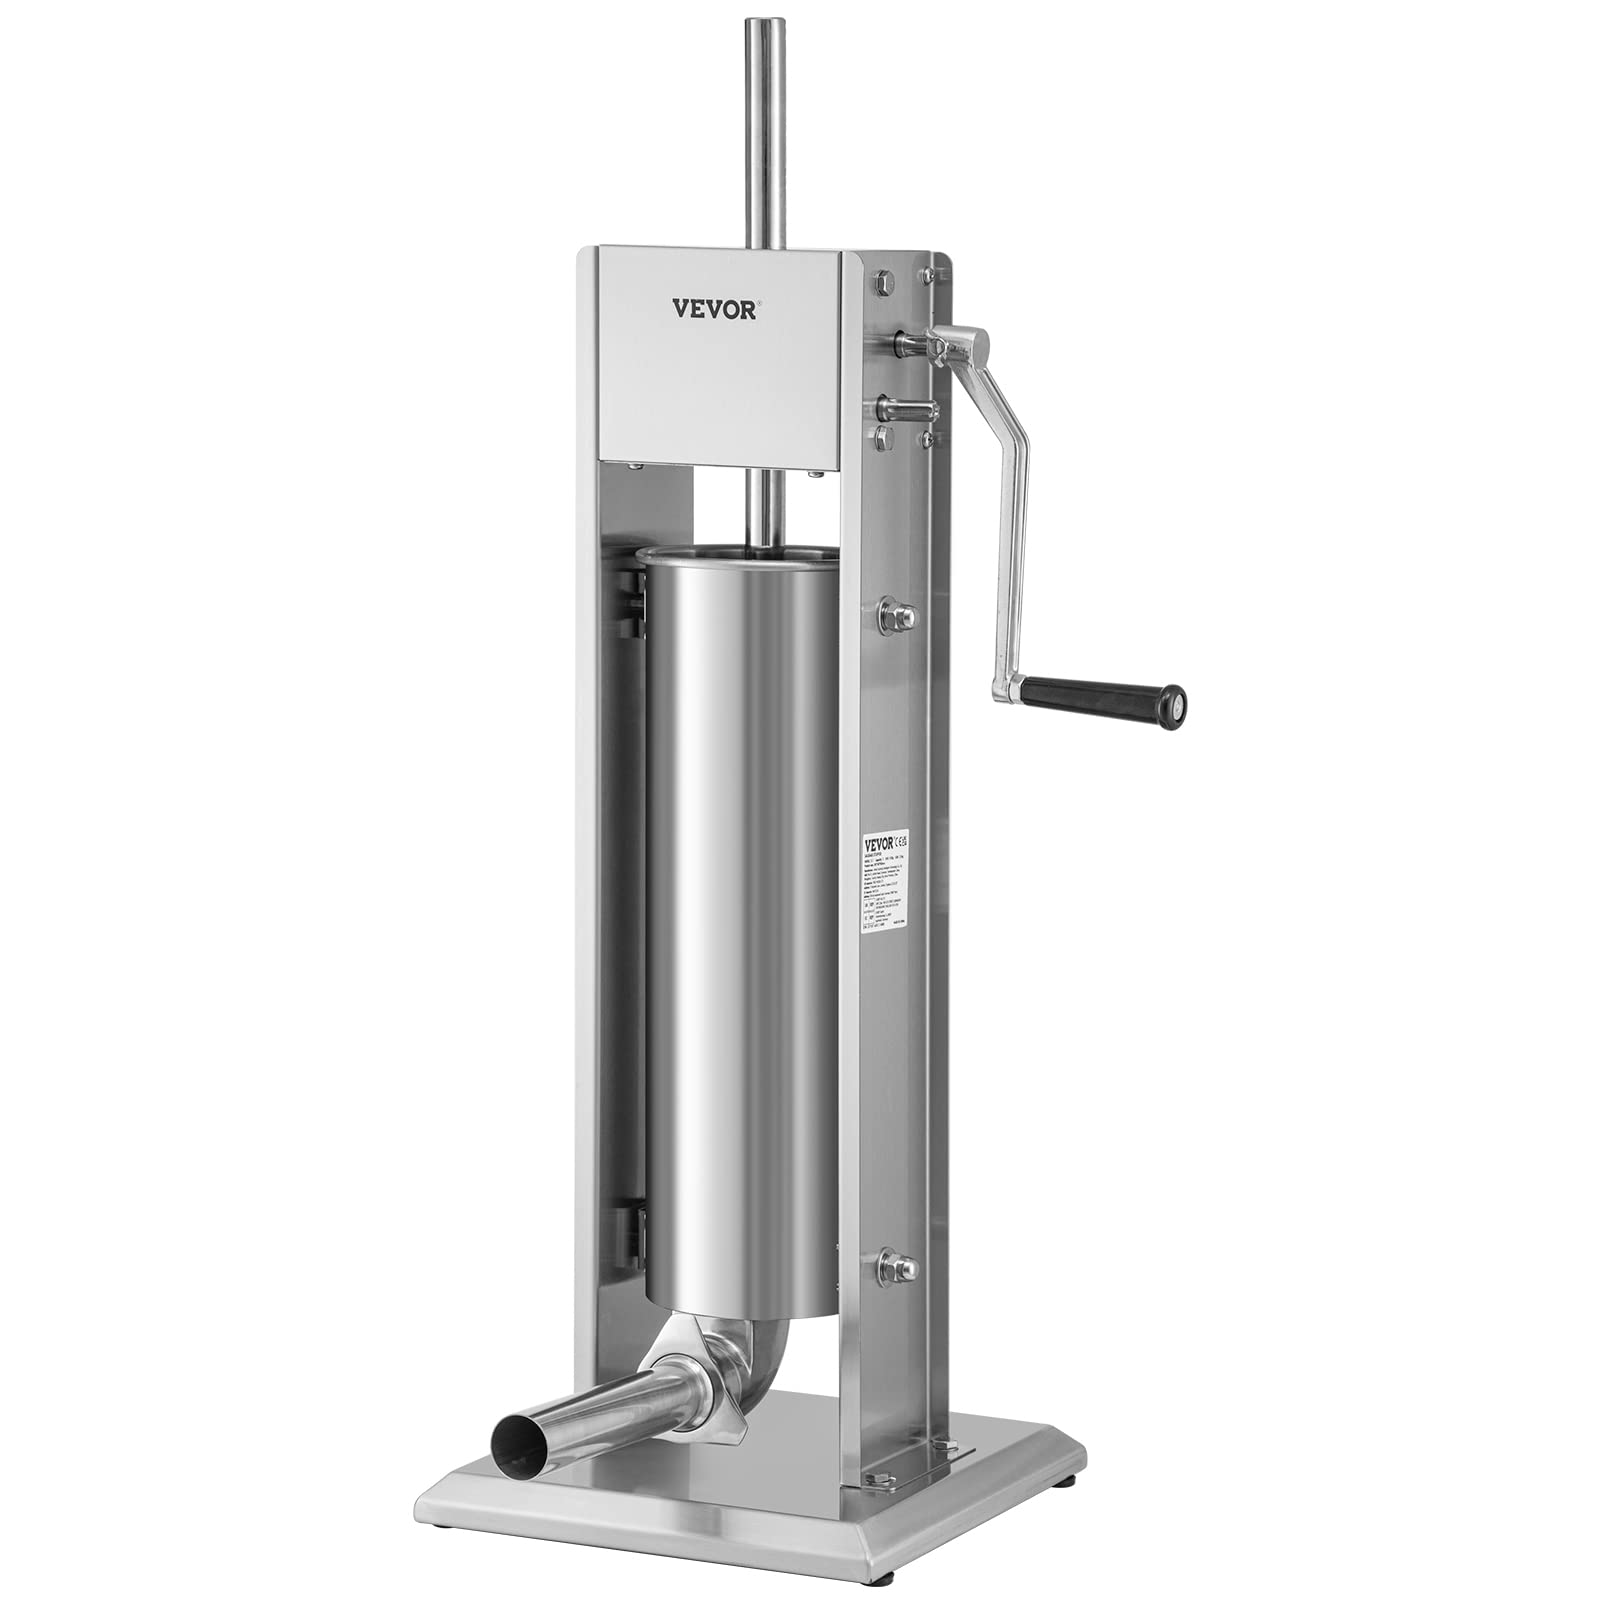 VEVOR Two Speed 304 Stainless Steel Vertical Stuffer Sausage Filling Machine with 4 Stuffing Tubes, 15LBS/7L Capacity, Silver